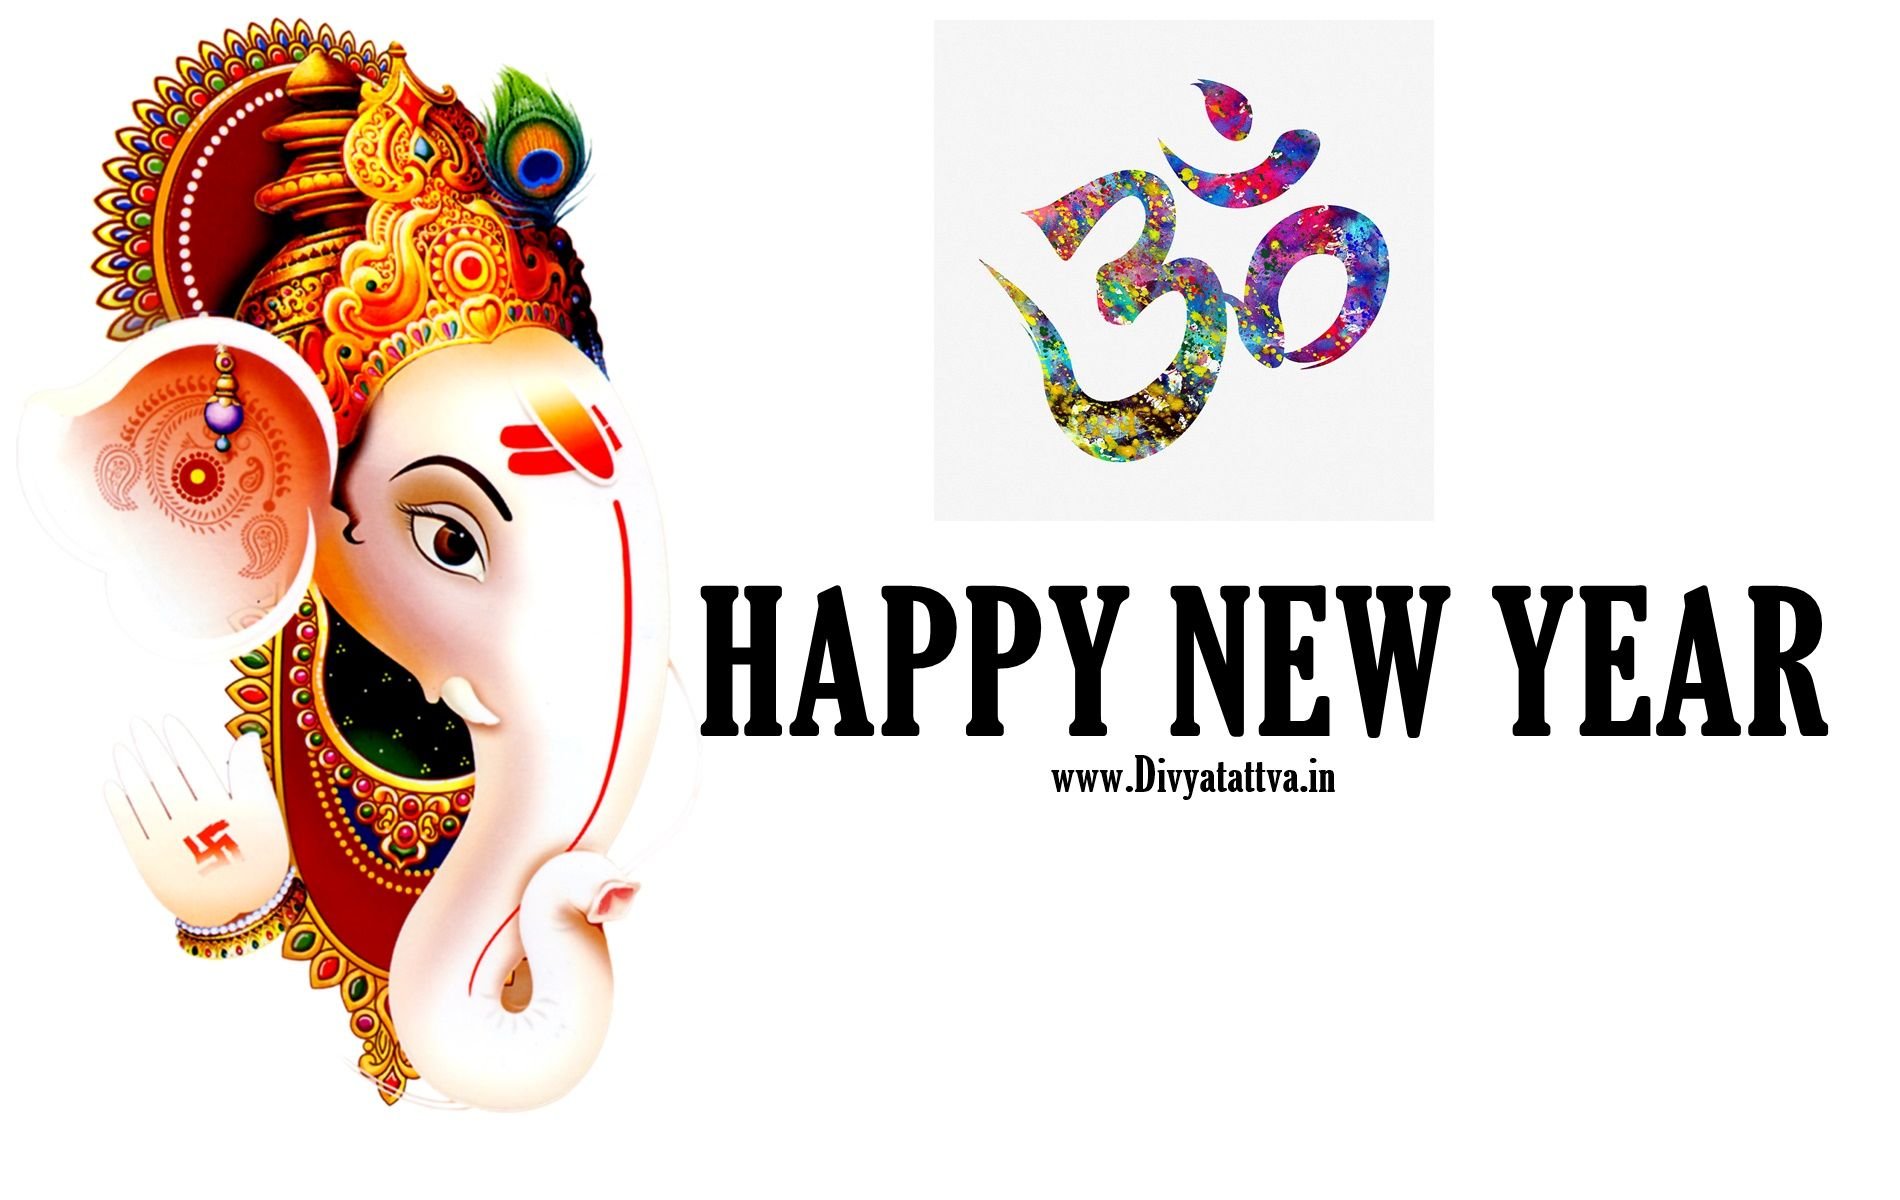 New Year Greetings wallpaper Happy New Year Spiritual Messages HD Image